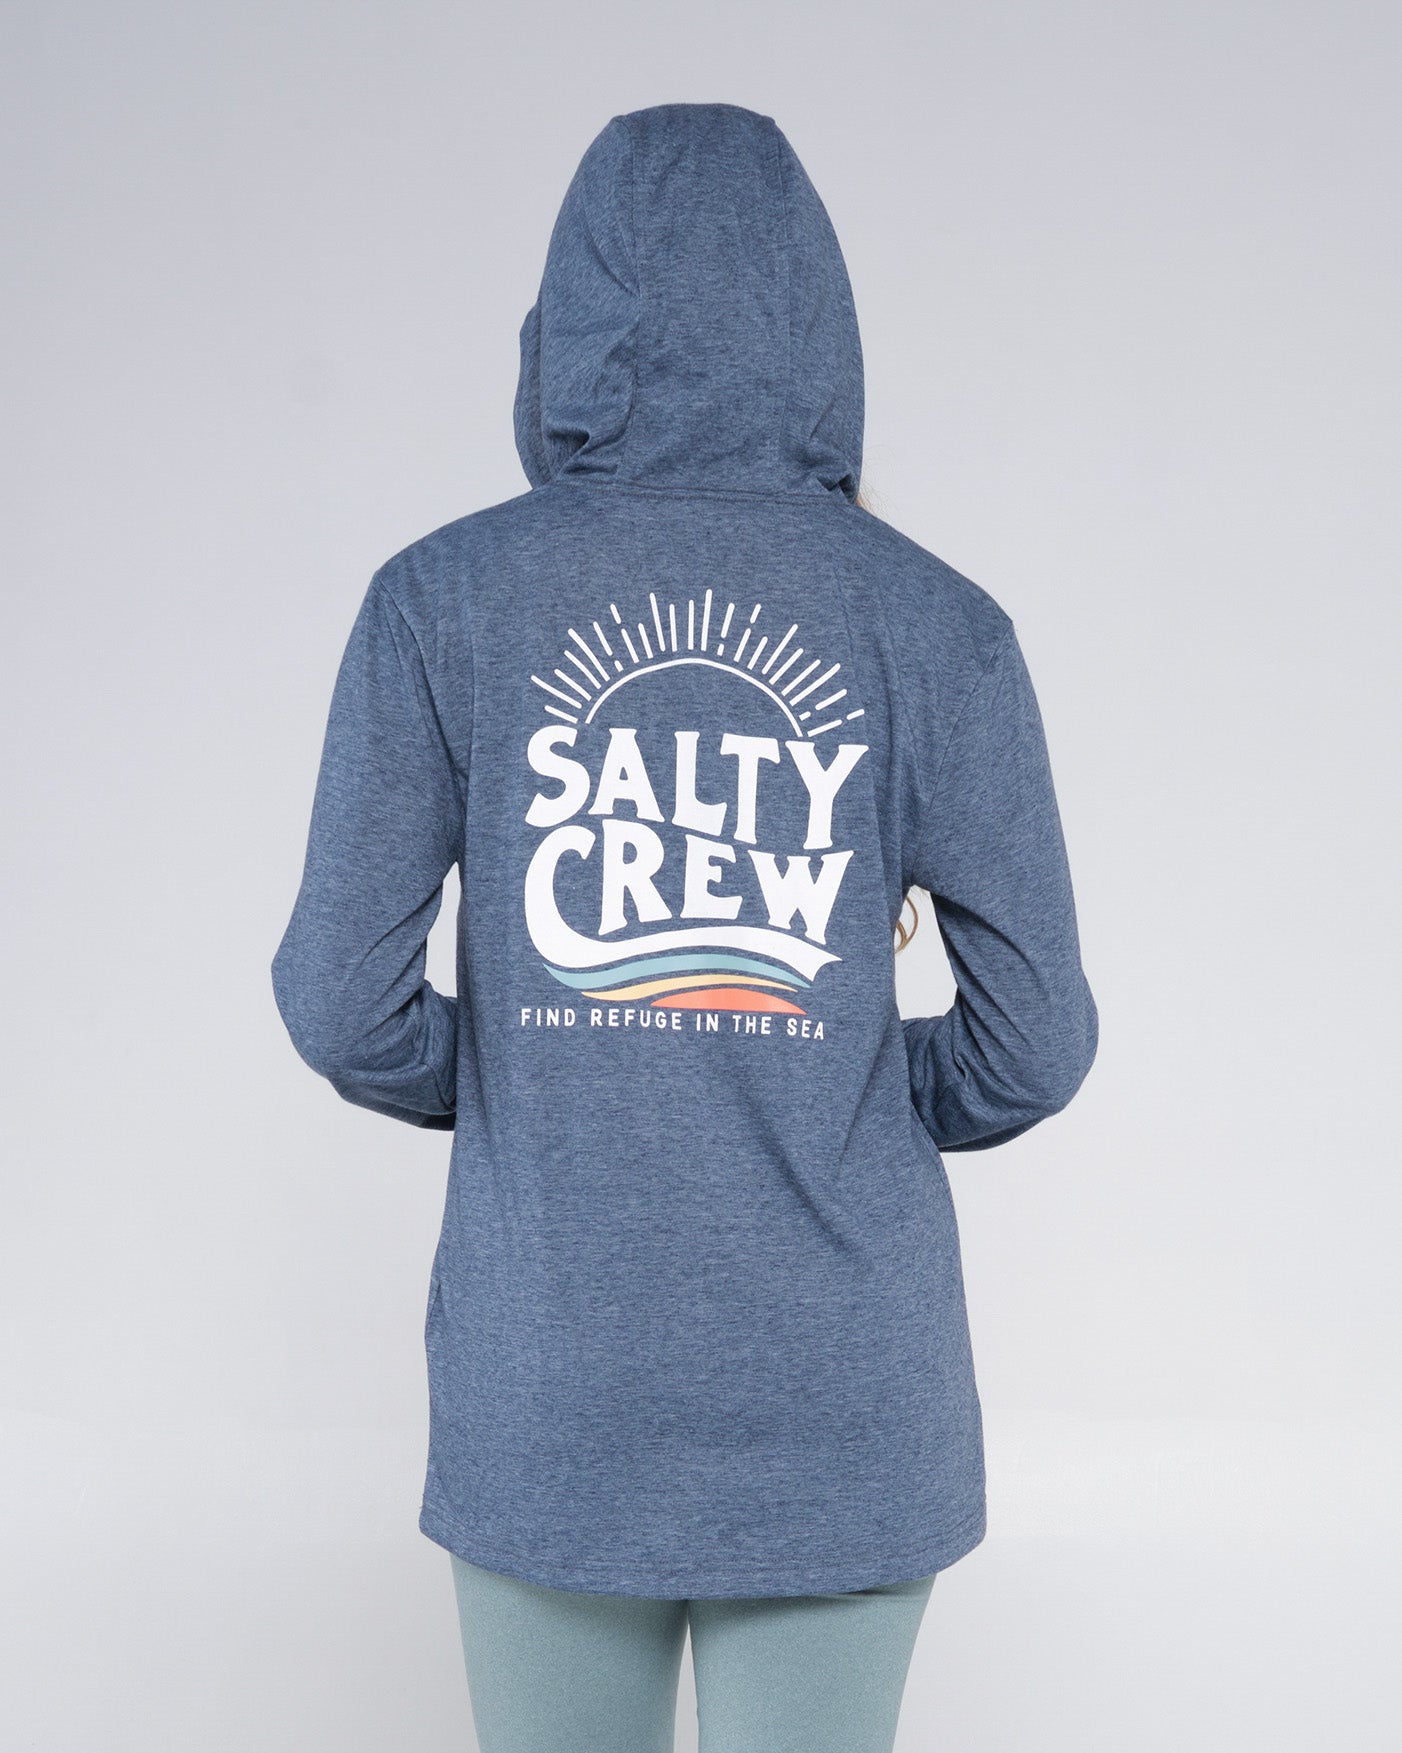 Salty Crew The Wave Mid Weight Hoodie - Navy Heather Womens Top